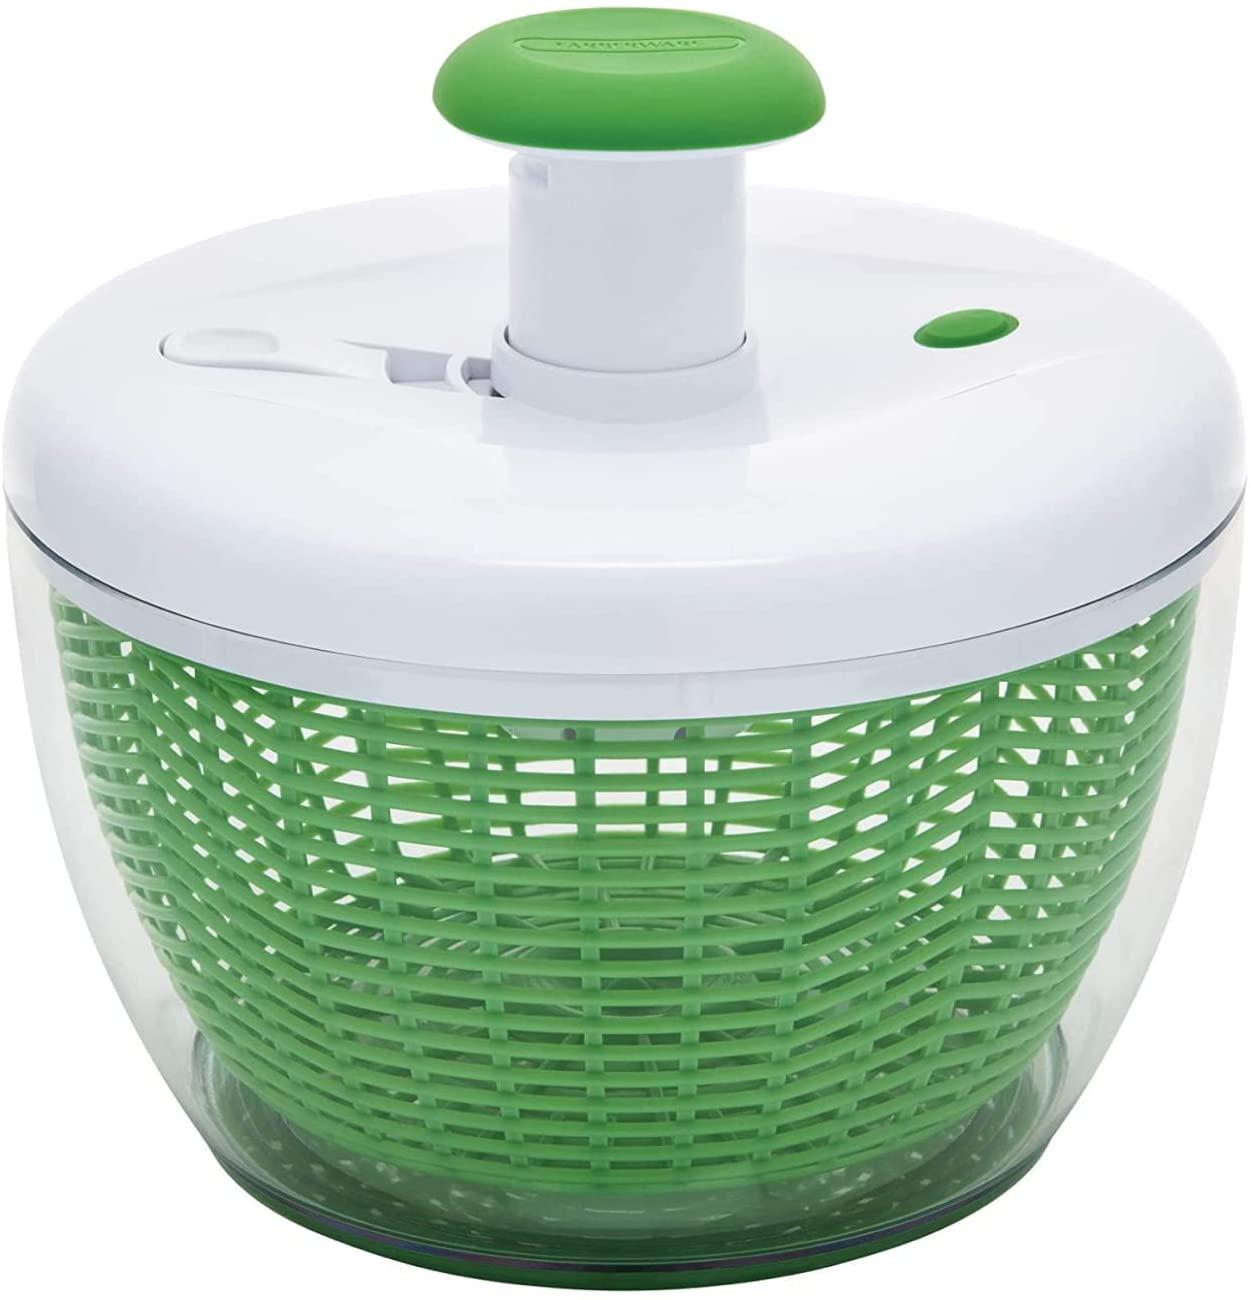 Farberware, Farberware Easy to use pro Pump Spinner with Bowl, Colander and Built in draining System for Fresh, Crisp, Clean Salad and Produce, Large 6.6 Quart, Green